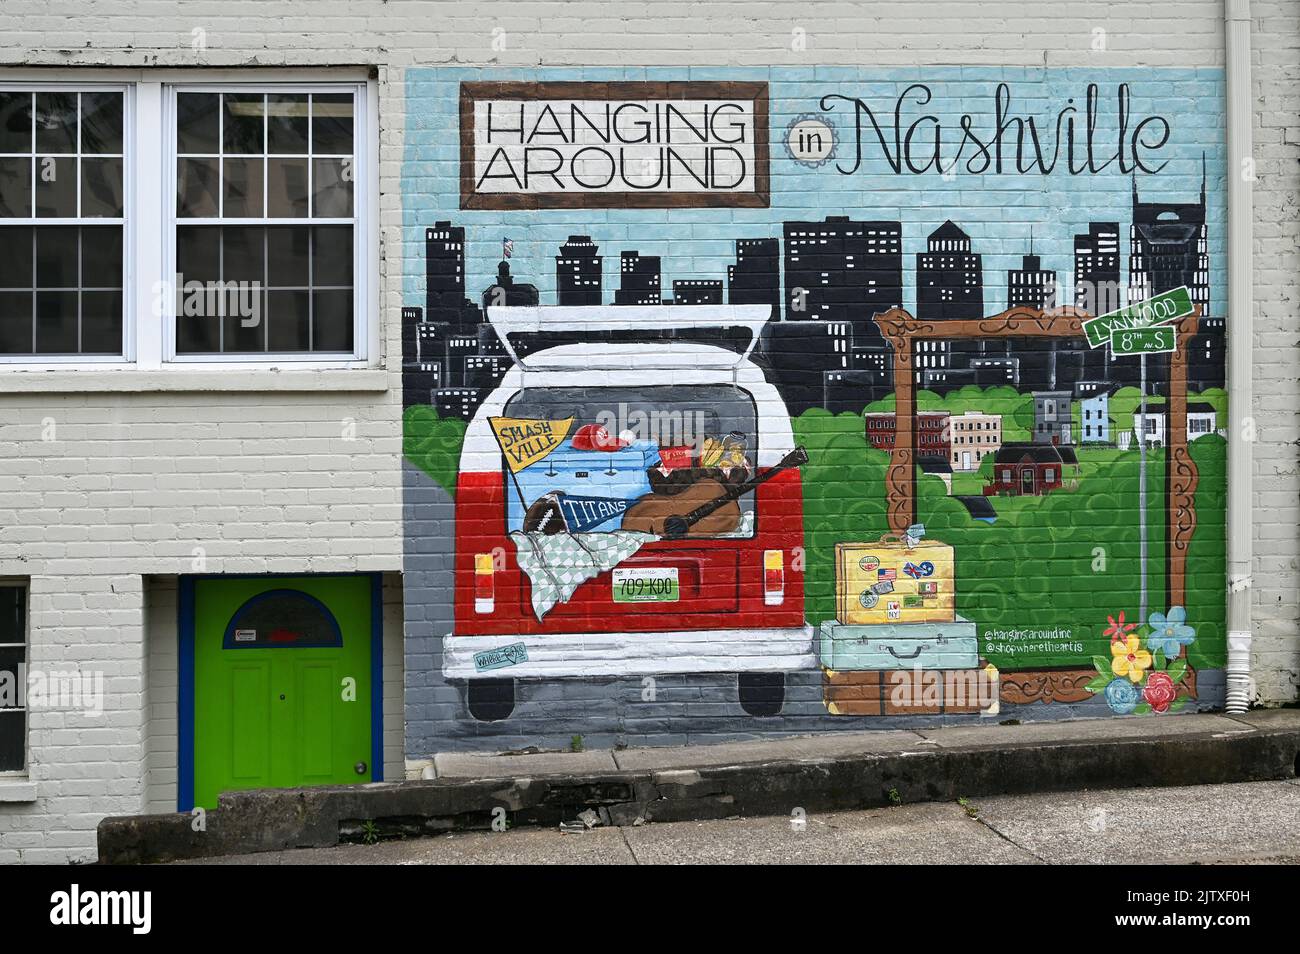 Hanging around mural, Nashville, Tennessee, United States of America Stock Photo